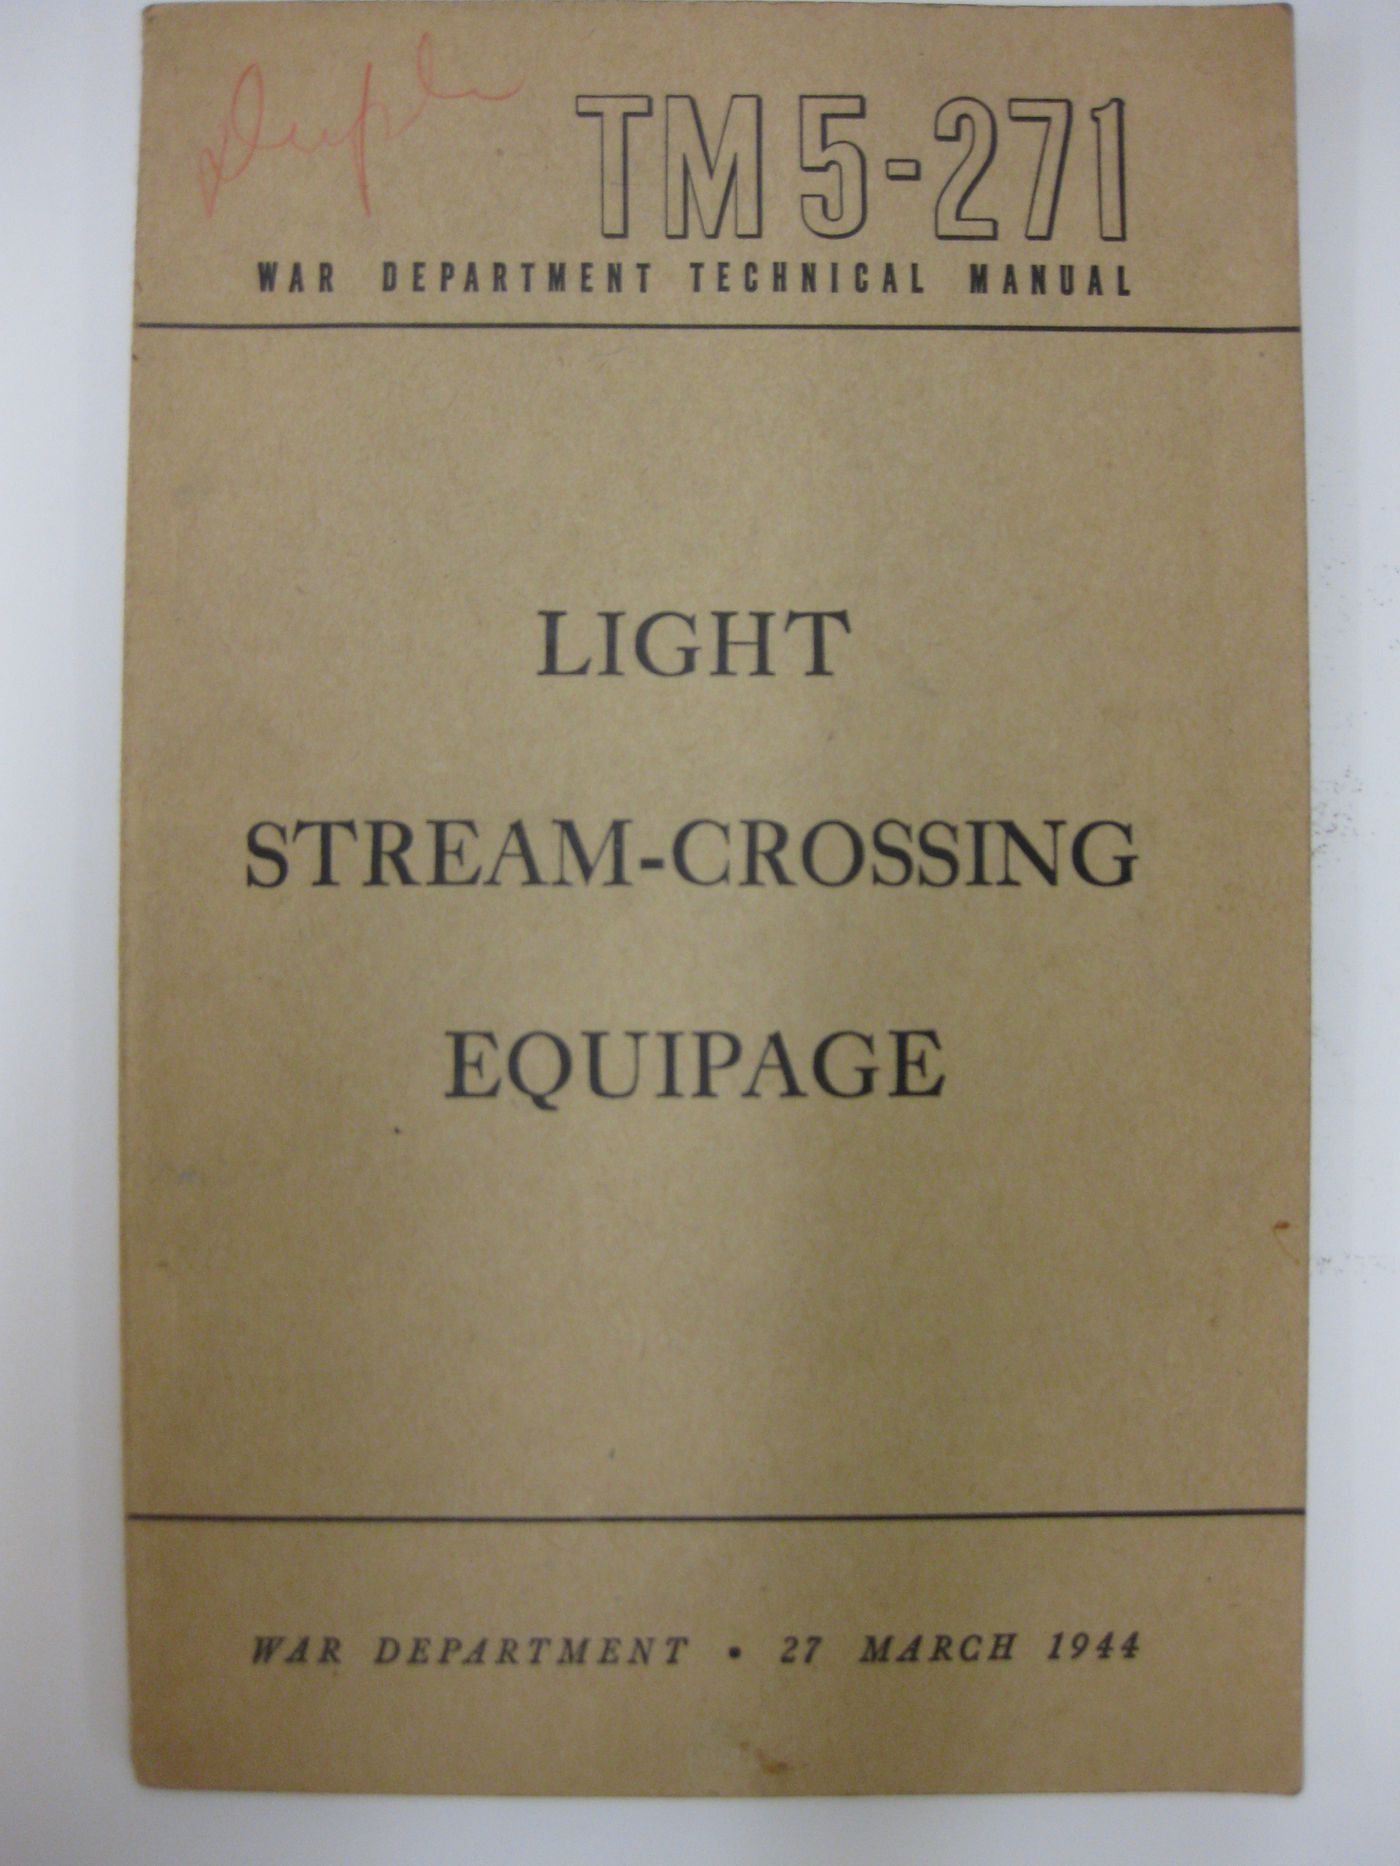 Light Stream-Crossing Equipage